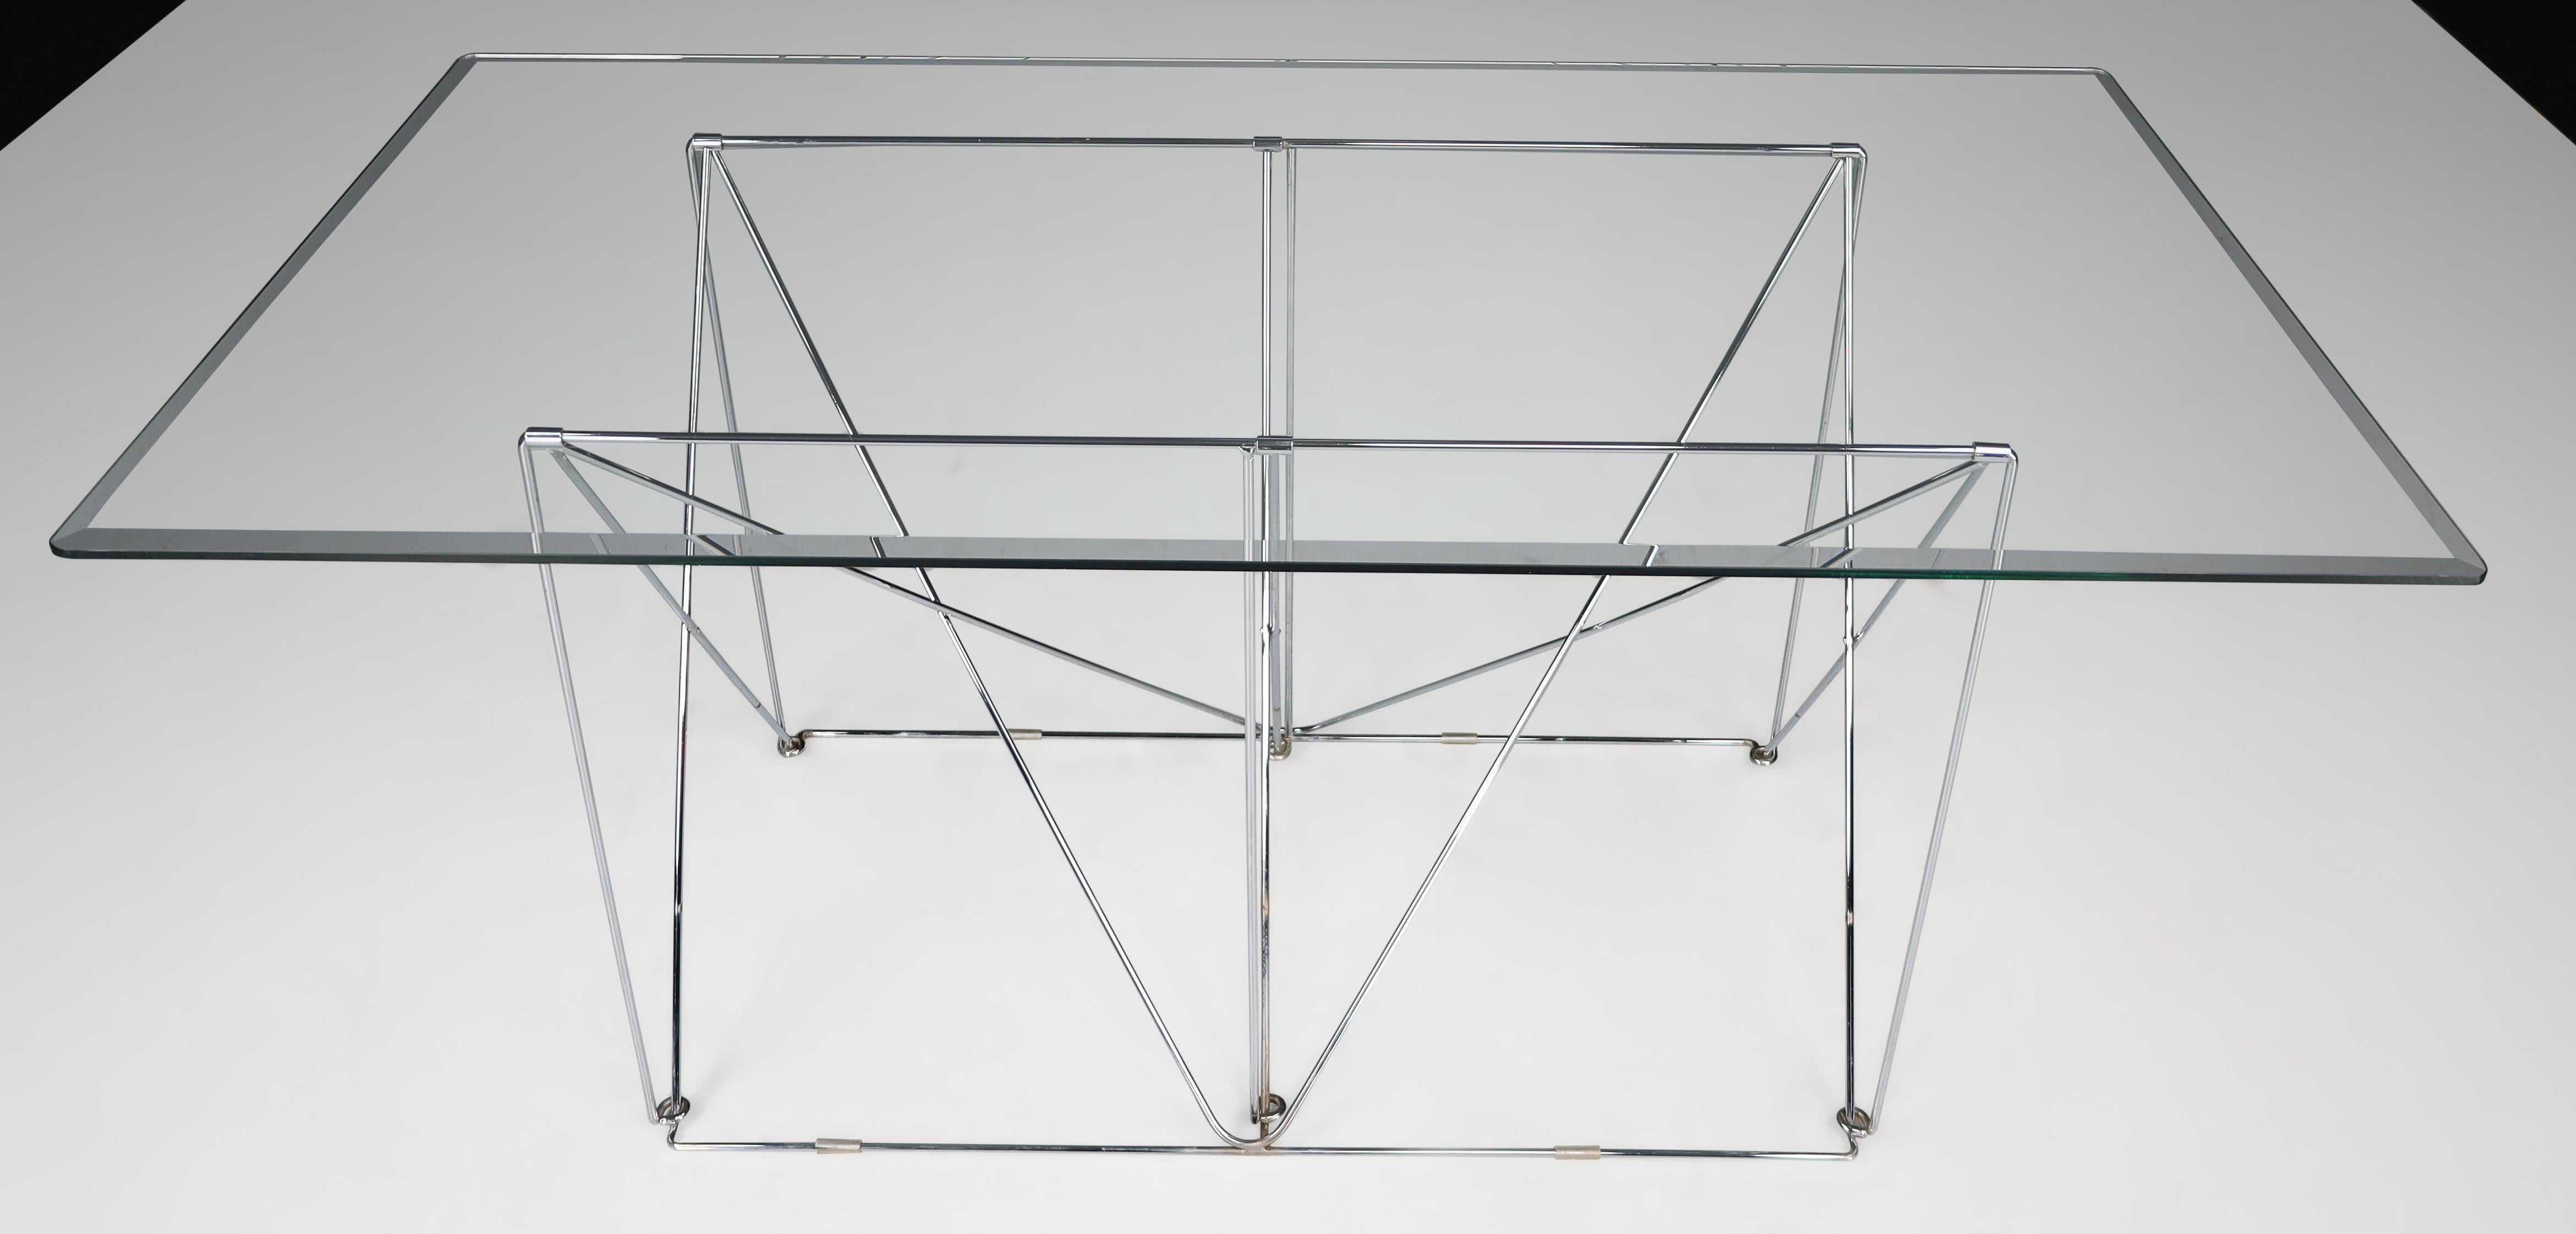 20th Century Max Sauze Modern Architectural Folding Metal Table, France, 1970s For Sale